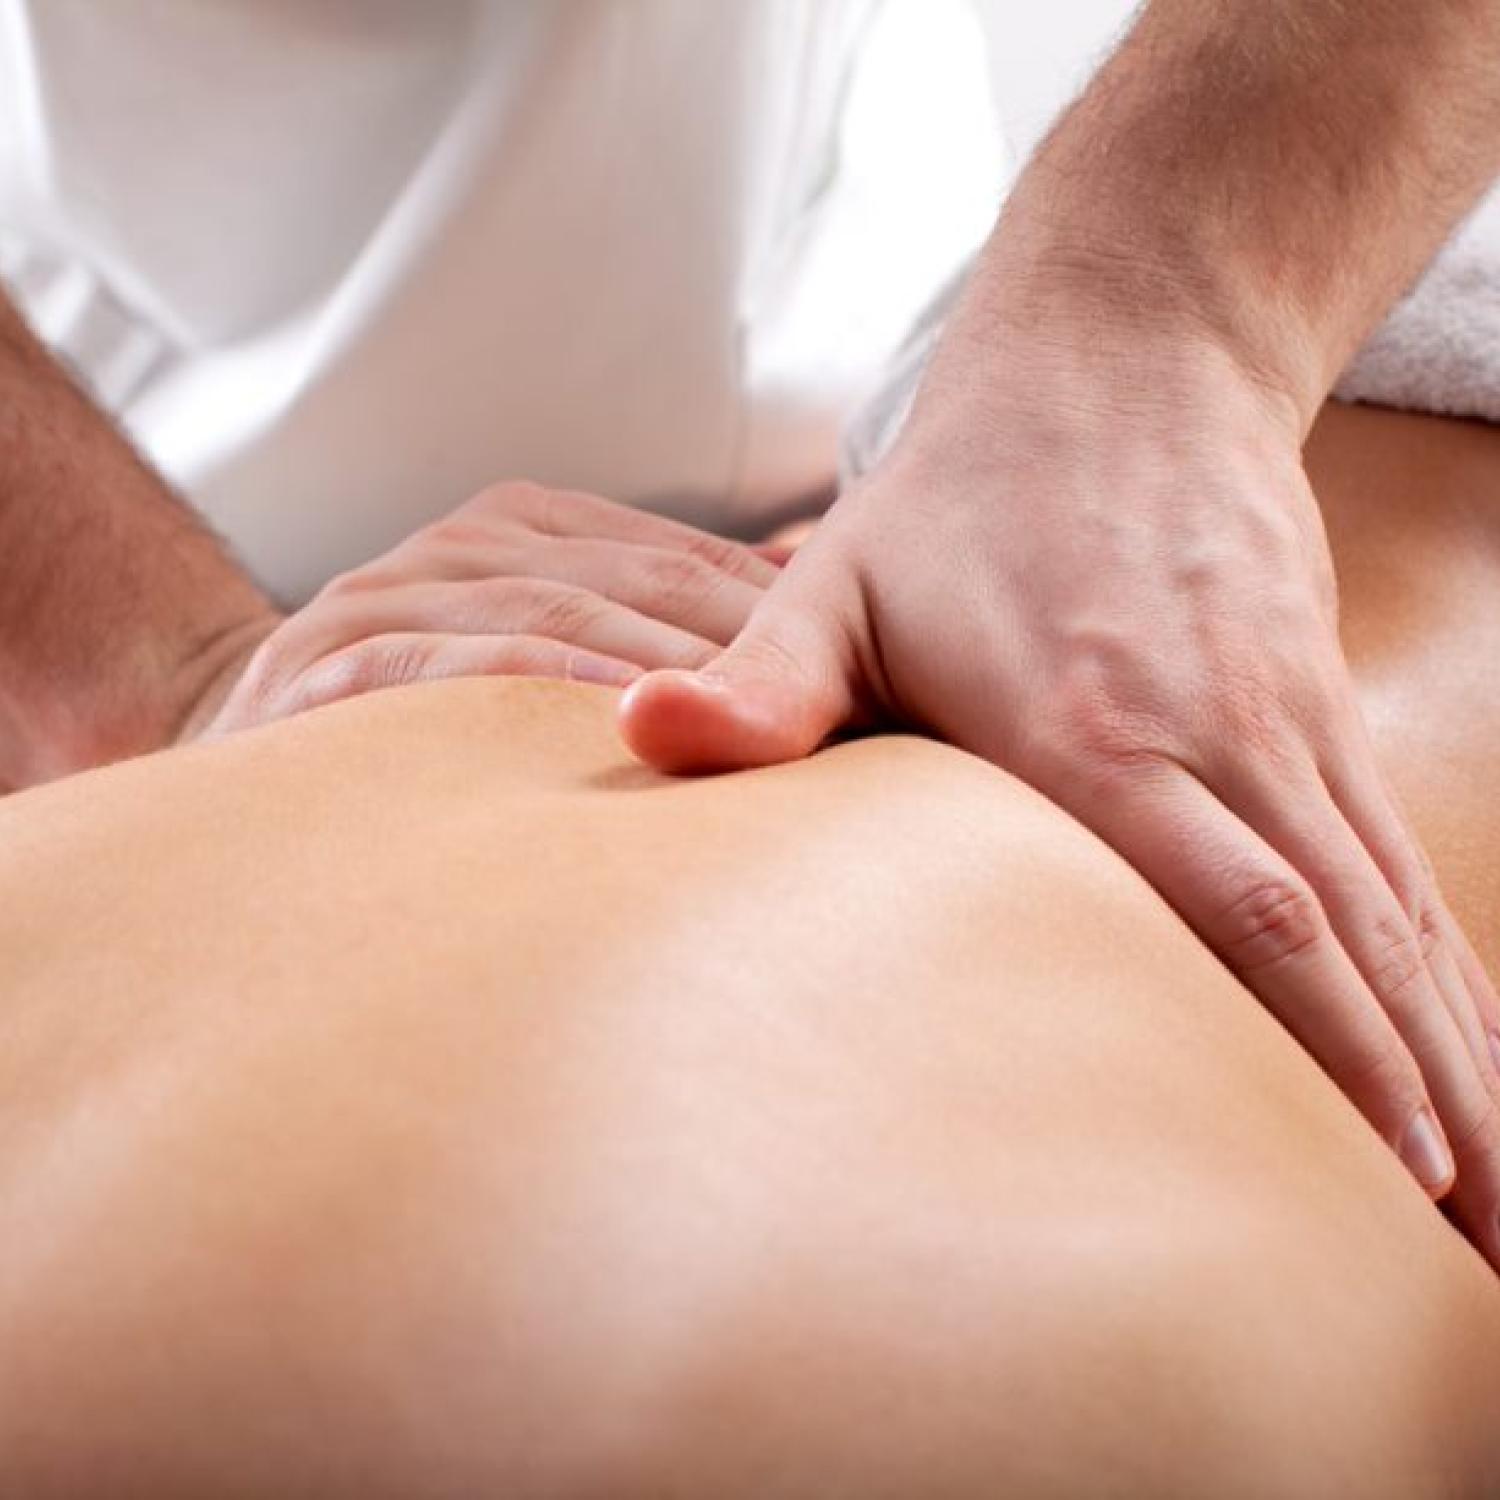 therapist performing massage on bare back